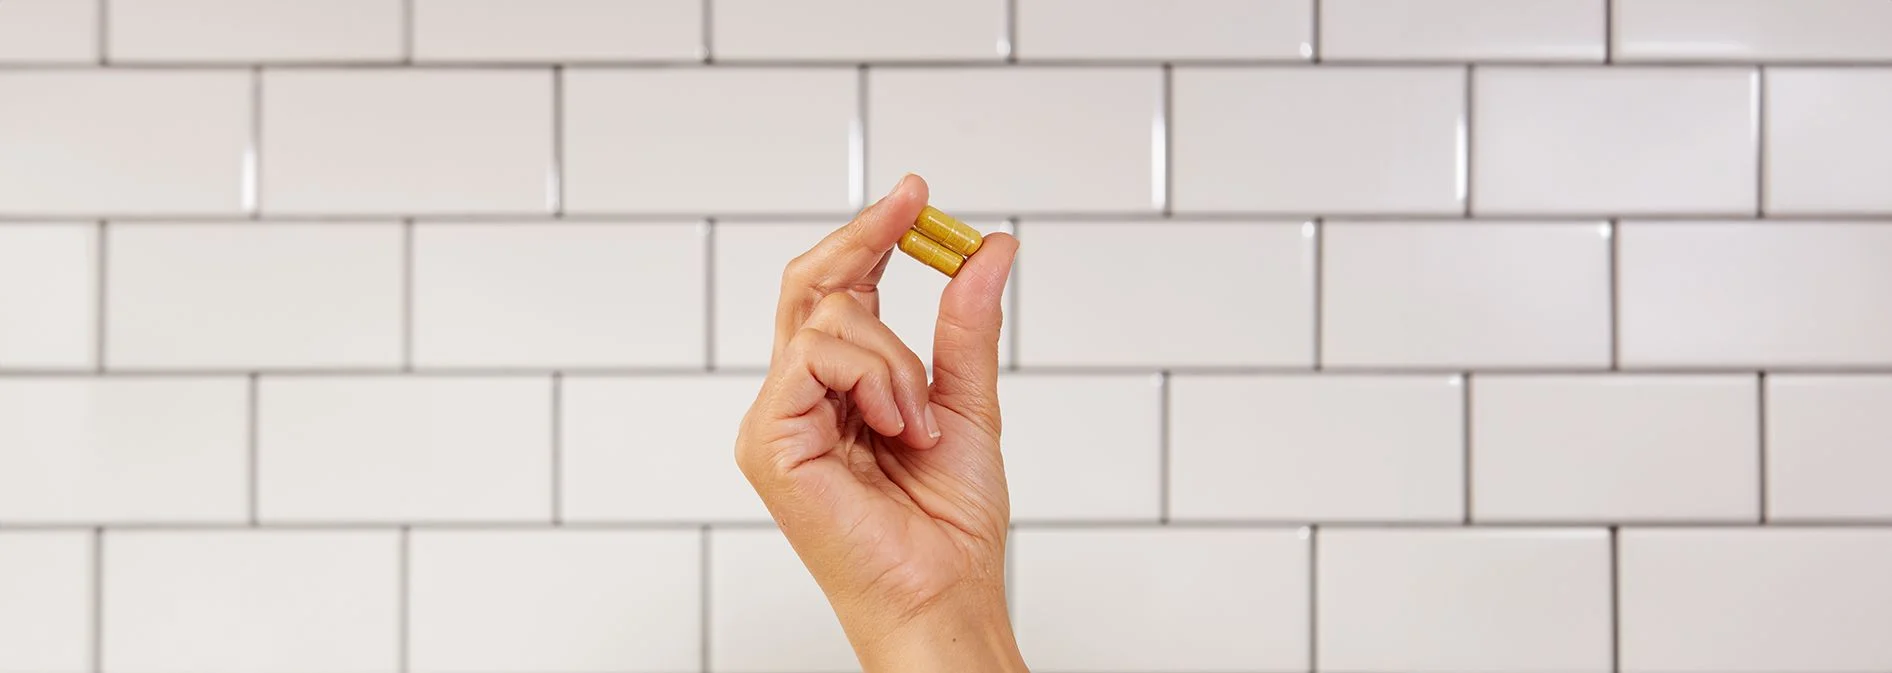 A hand holding two capsules of NativePath Naive Berberine with white subway tile in the background. 